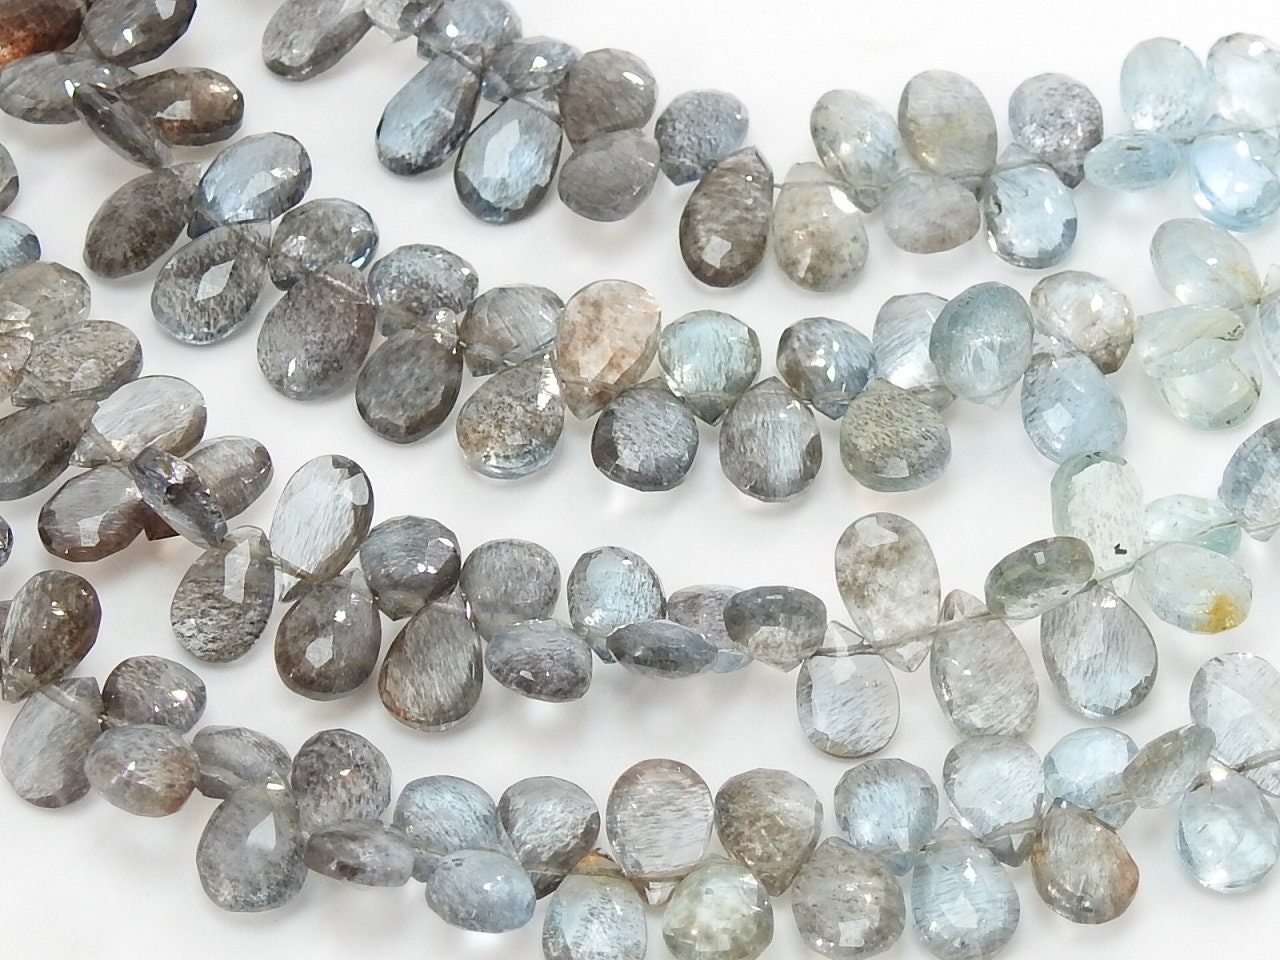 Moss Aquamarine Faceted Teardrops,Multi Shaded,Loose Stone,Gemstone For Jewelry,100%Natural,8Inch 11X7To10X6MM Approx,PME(BR4) | Save 33% - Rajasthan Living 14